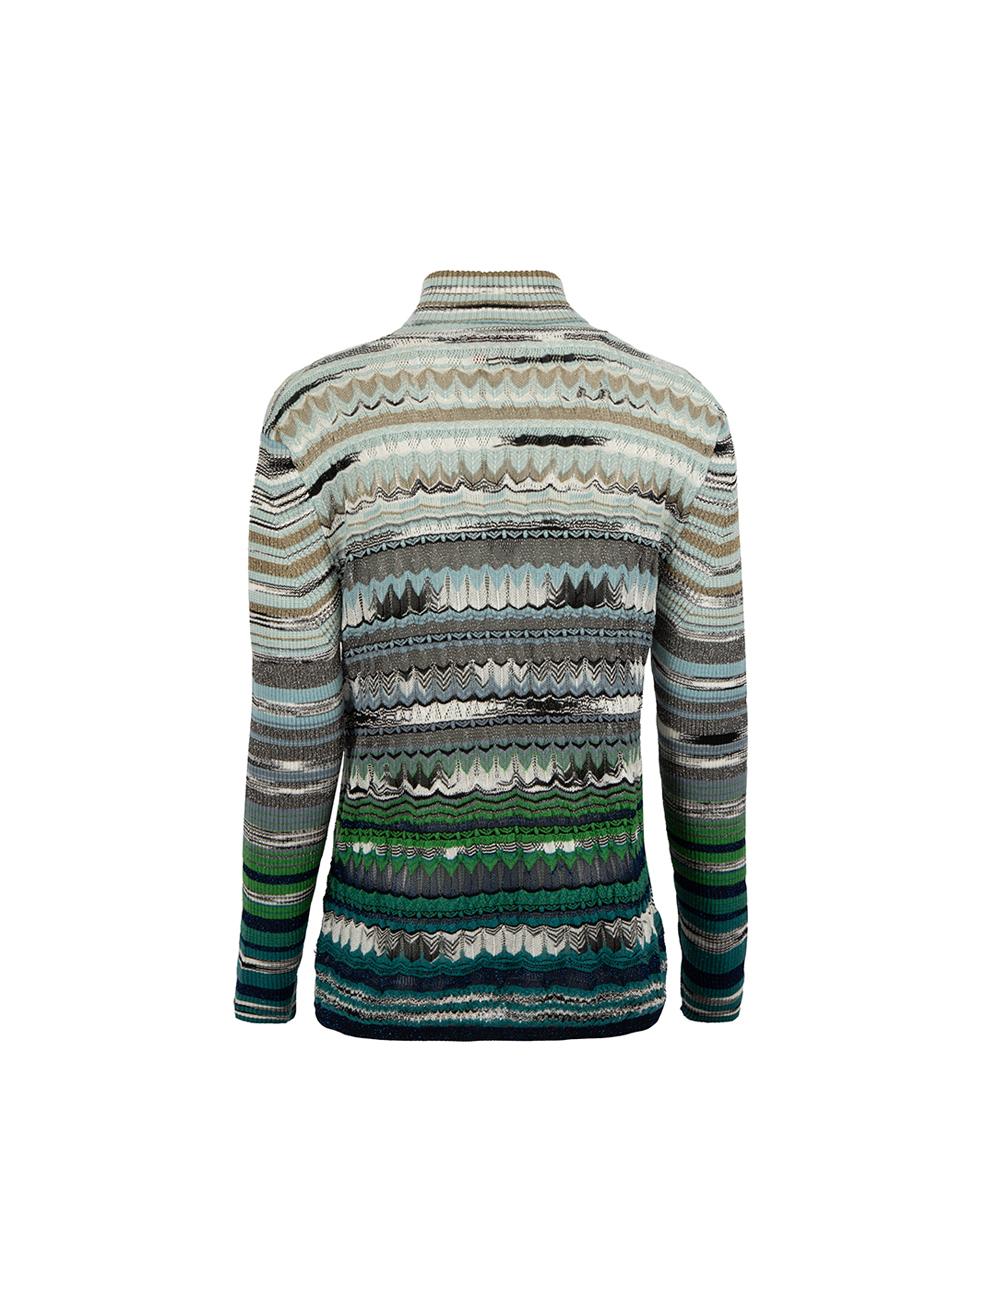 CONDITION is Good. Minor wear to knitwear is evident. Light wear to knit composition with a couple of minor plucks to the weave found on this used Missoni designer resale item.
  
Details
Multicolour
Viscose
Long sleeves jumper
Sheer knit